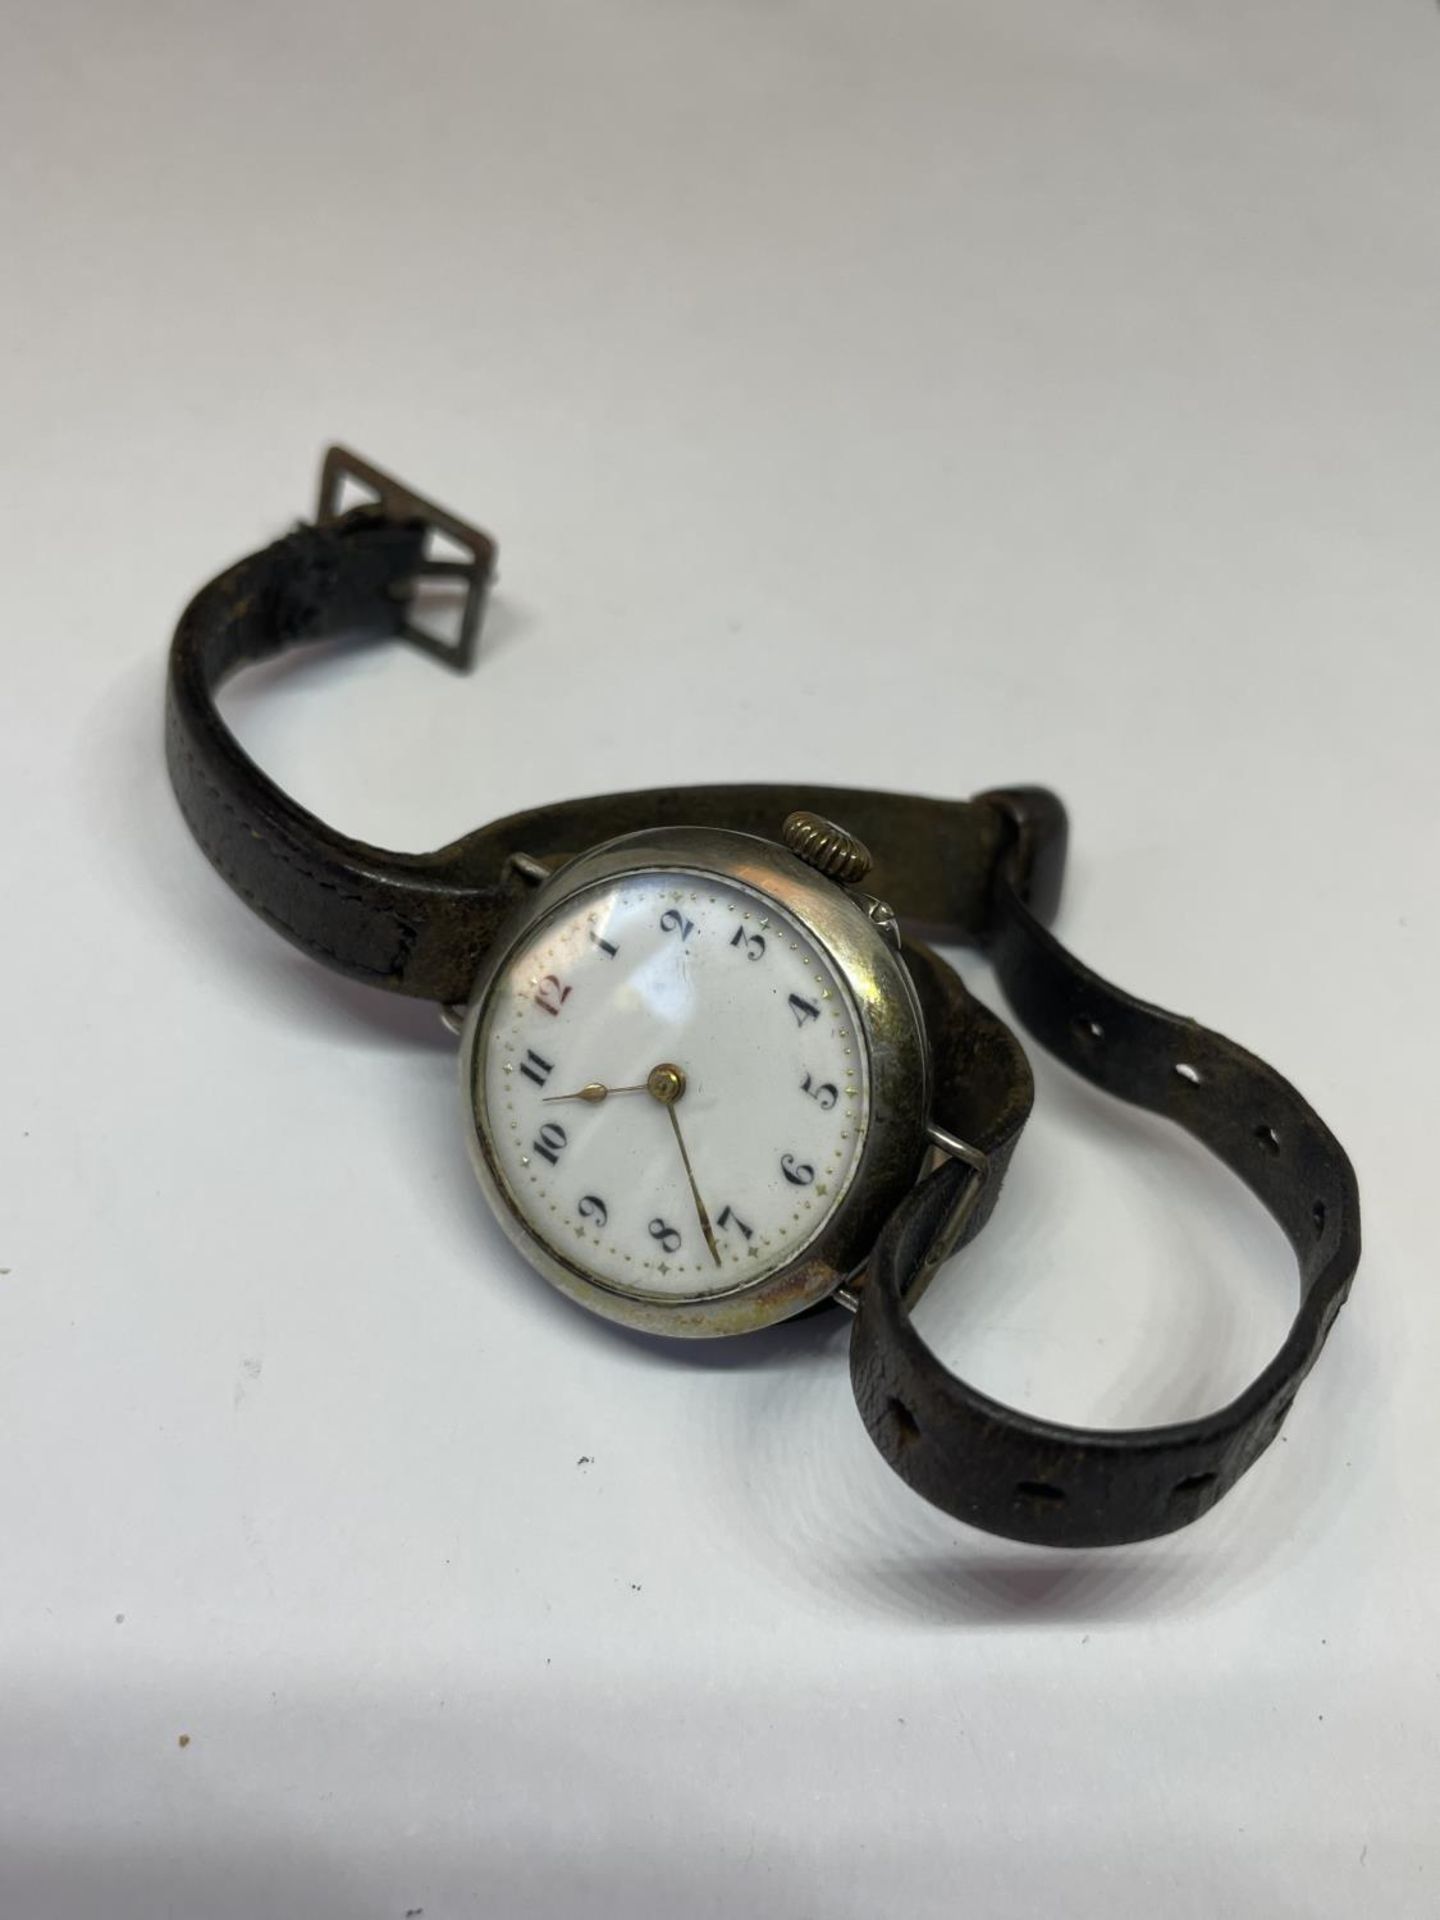 A MARKED 925 VINTAGE WRIST WATCH WITH A LEATHER STRAP IN A PRESENTATION BOX